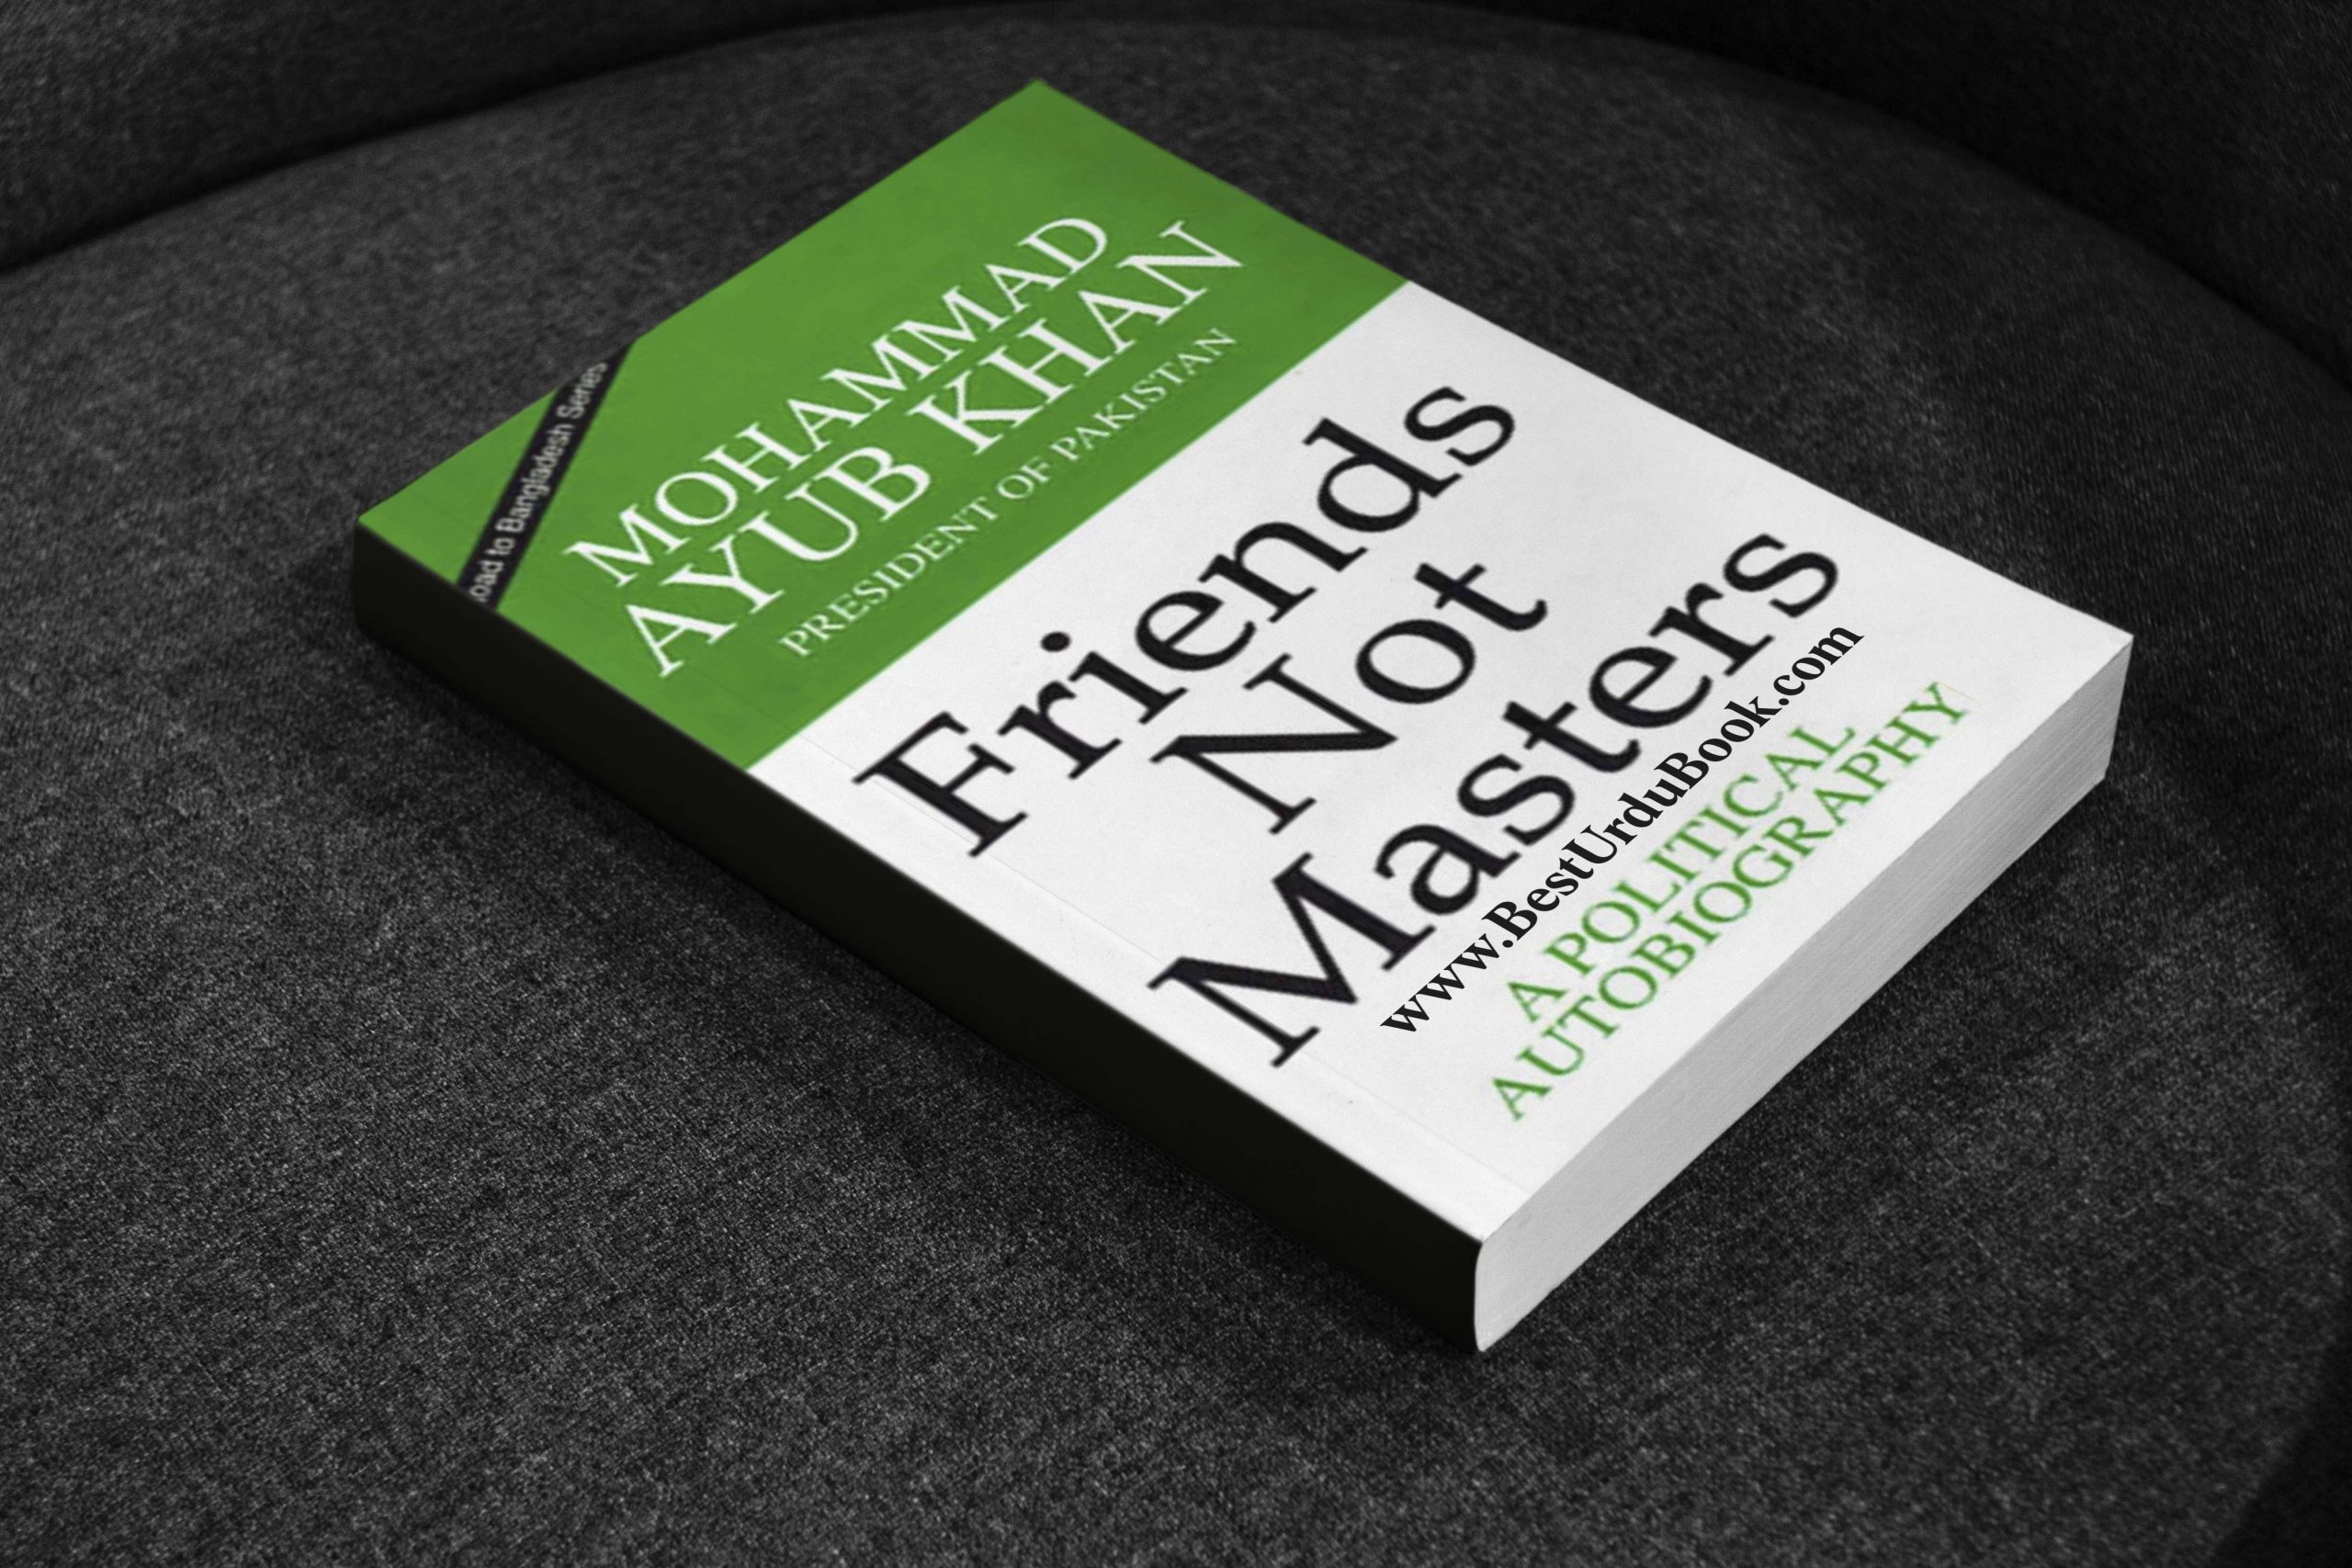 Friends not masters Book